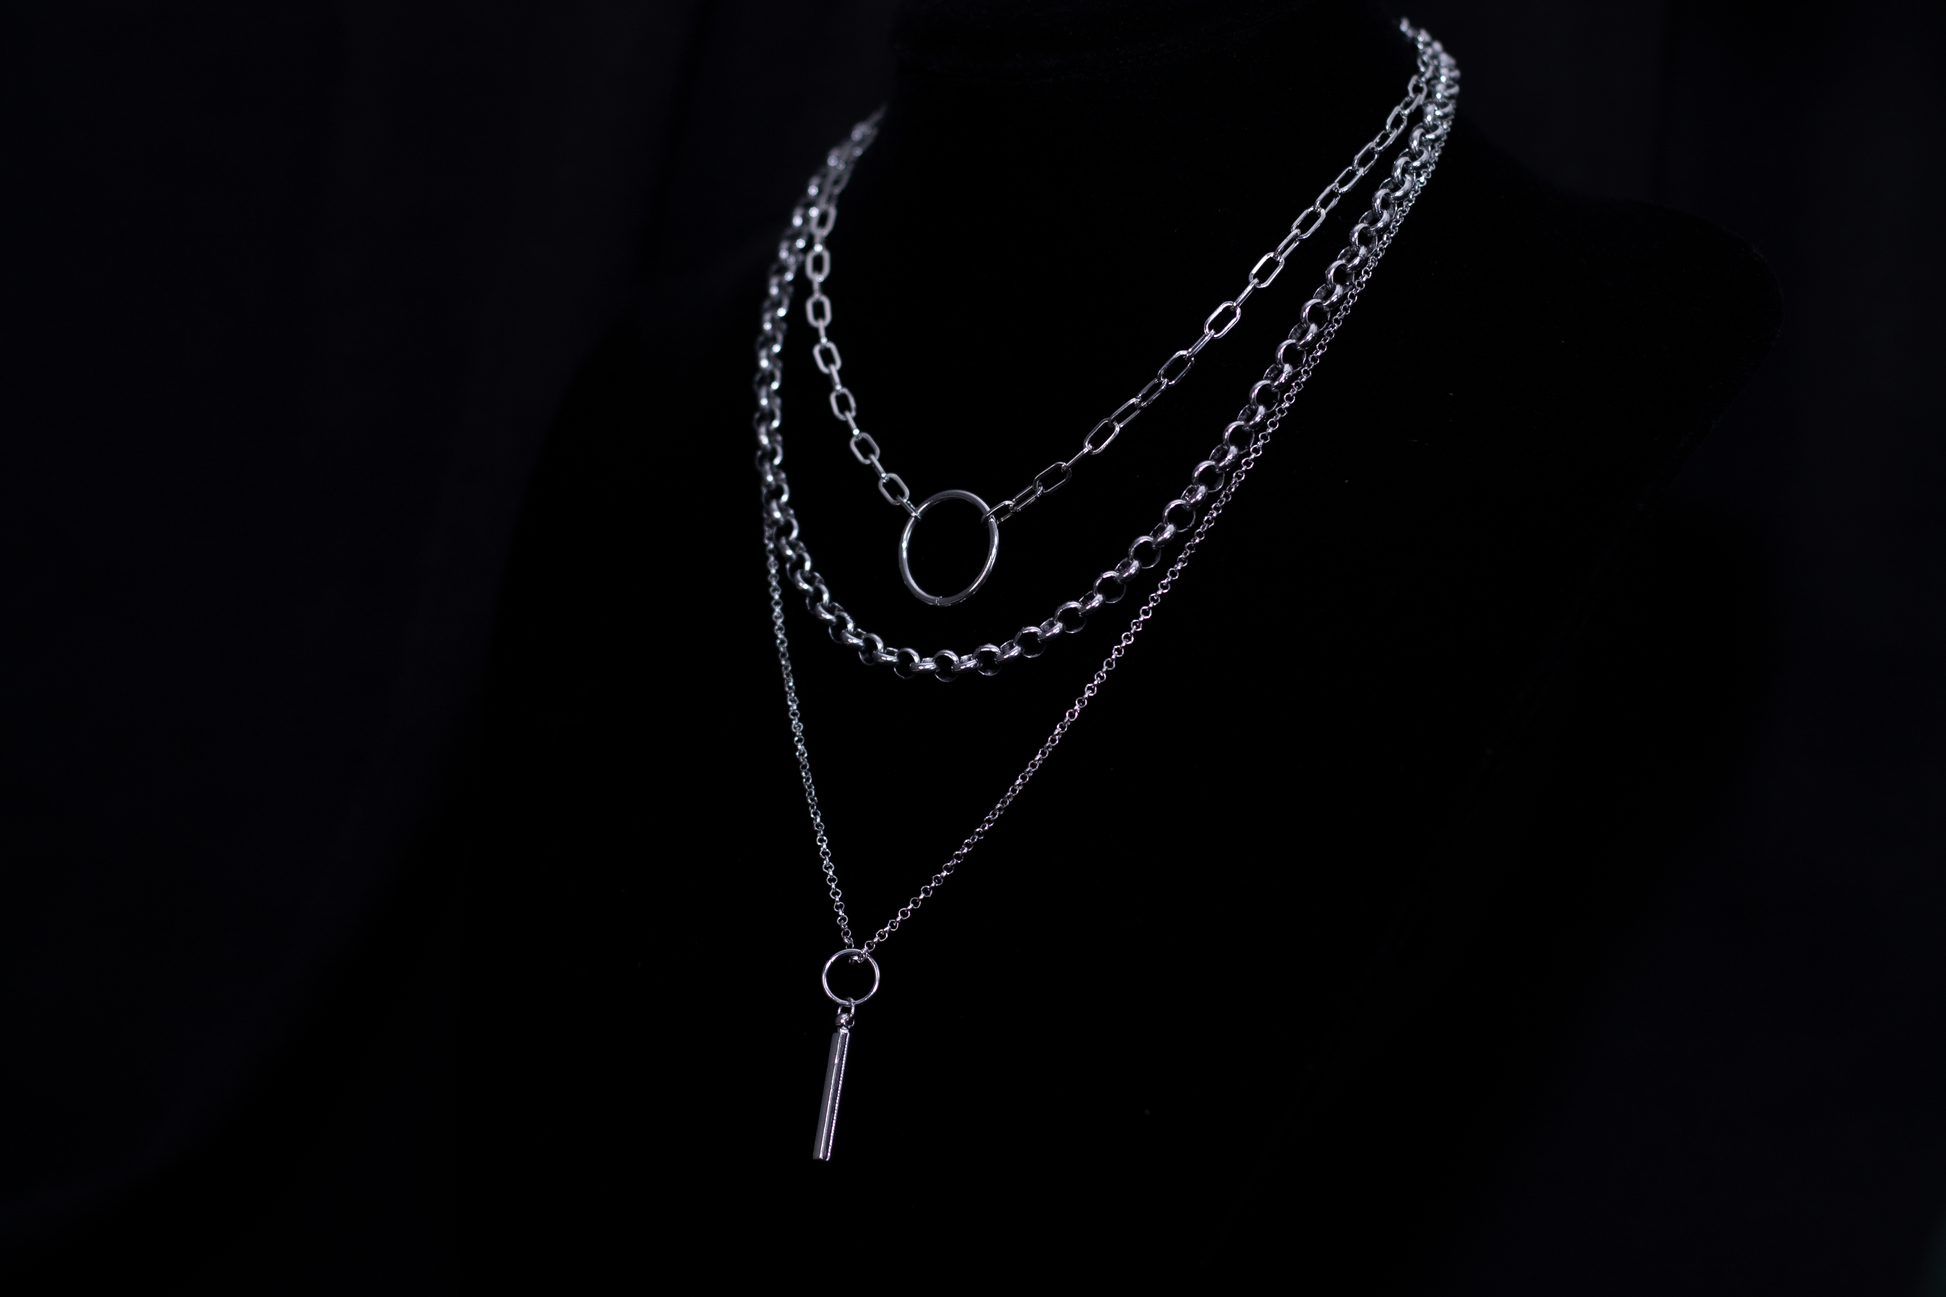 Showcasing a Myril Jewels punk multi-chain necklace with a layered design and a central hoop, this piece is a quintessential neo-goth accessory for an edgy, dark-avantgarde look.